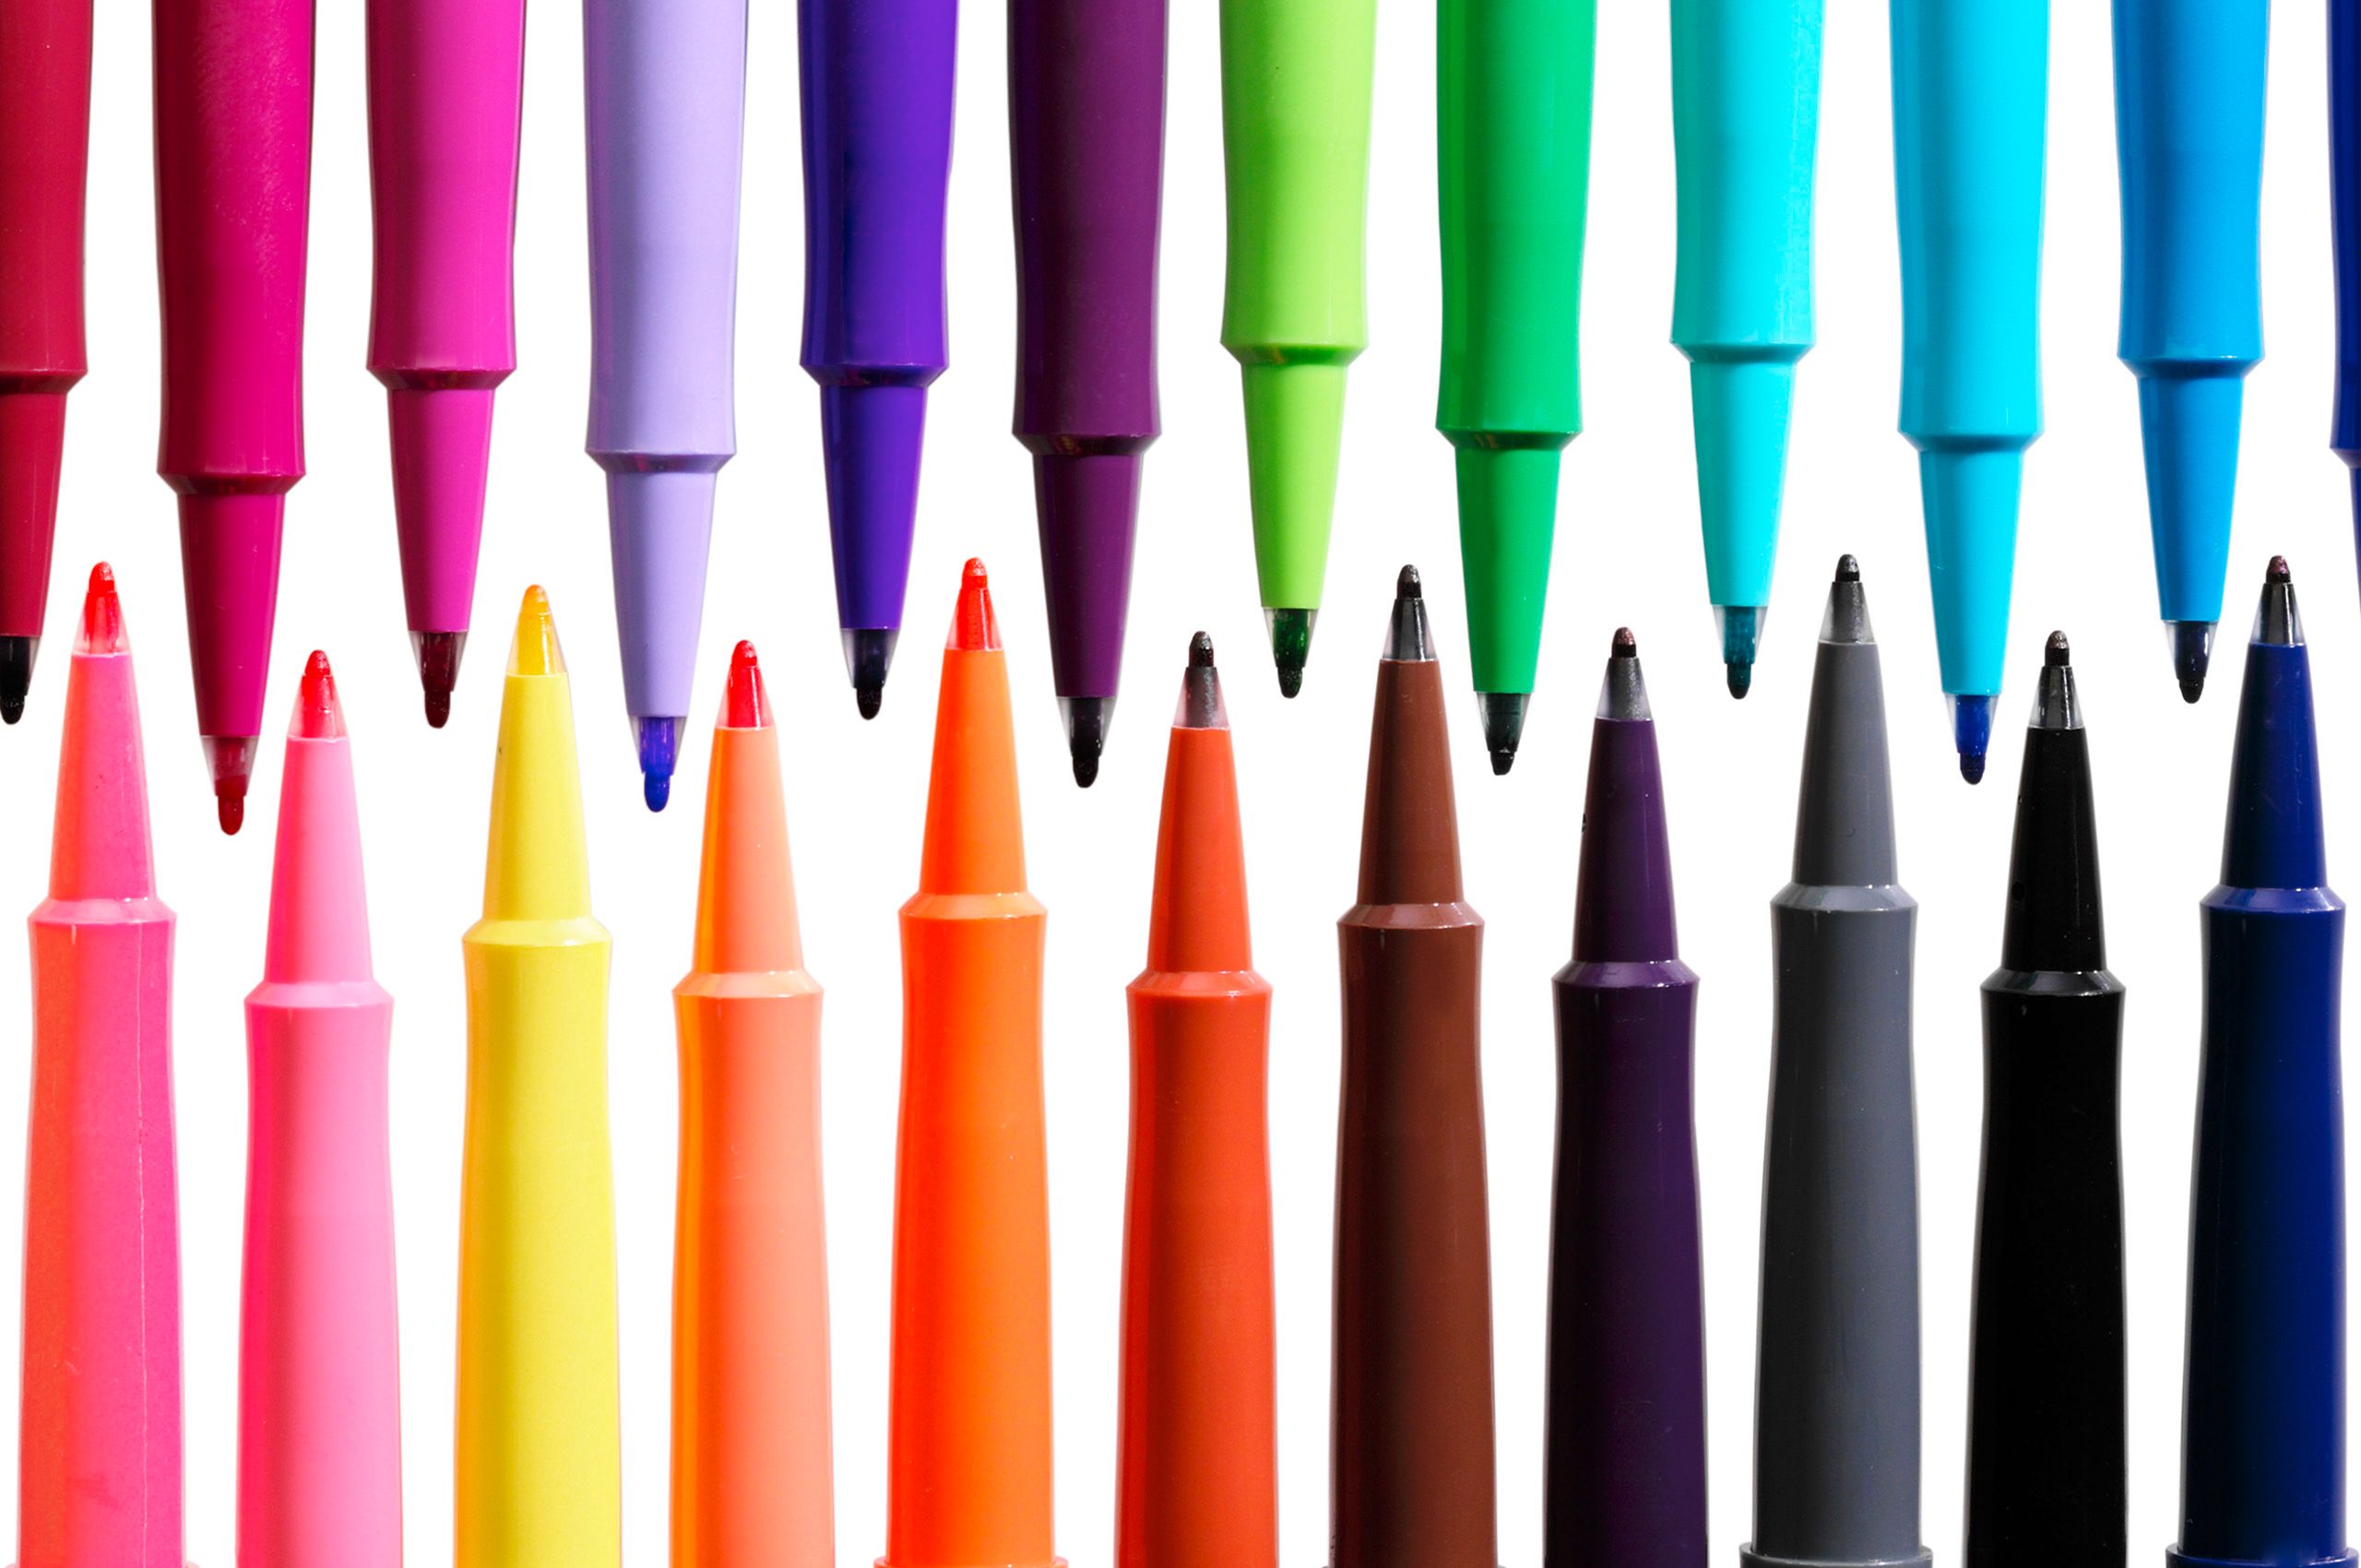 Colored pens by Paper mate